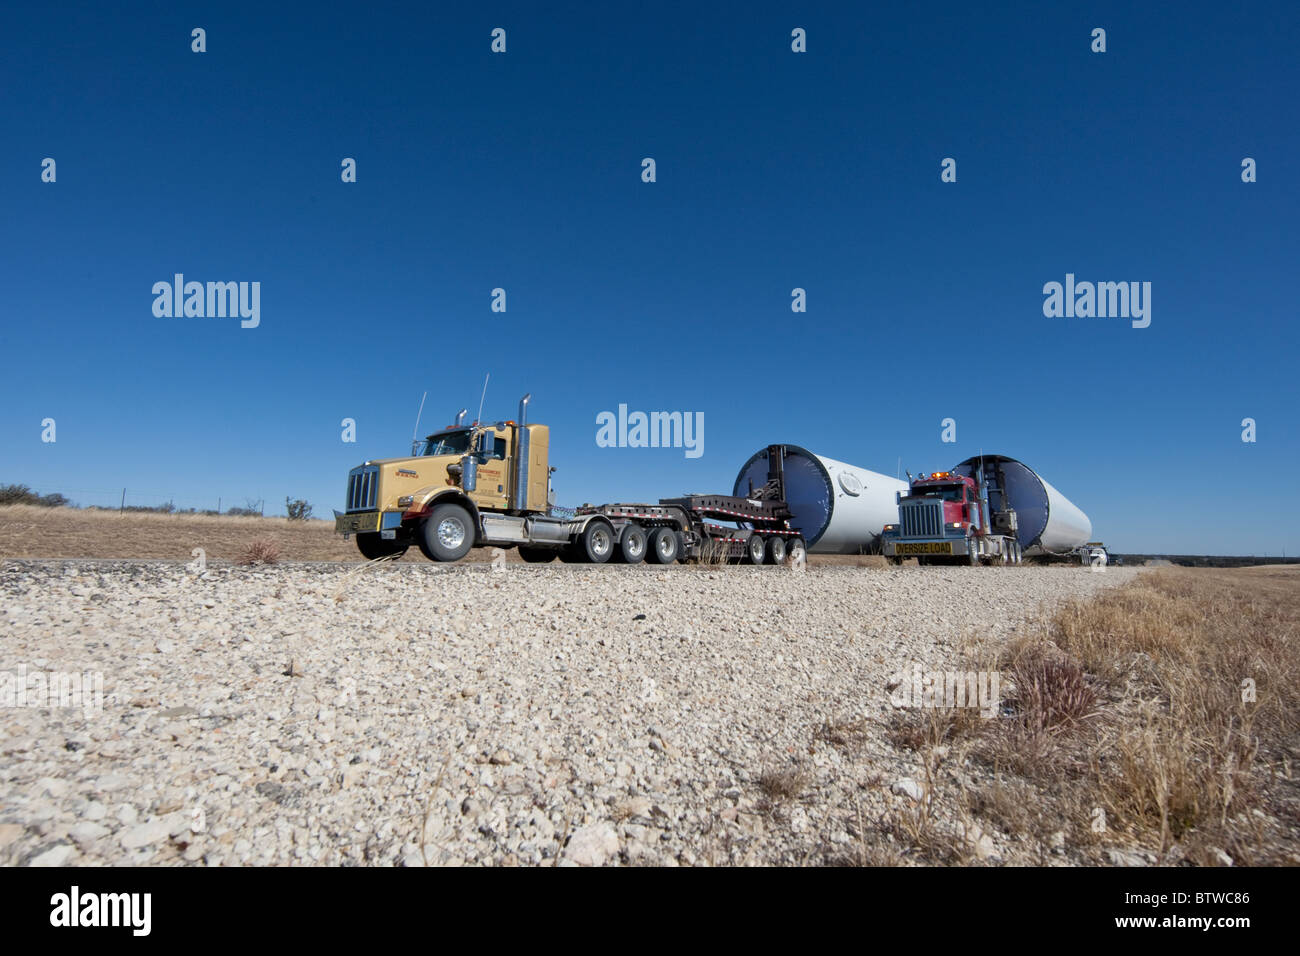 Tractor-trailer trucks in a rural area near San Angelo TX haul components of a high-tech windmills to a wind farm in West Texas. Stock Photo